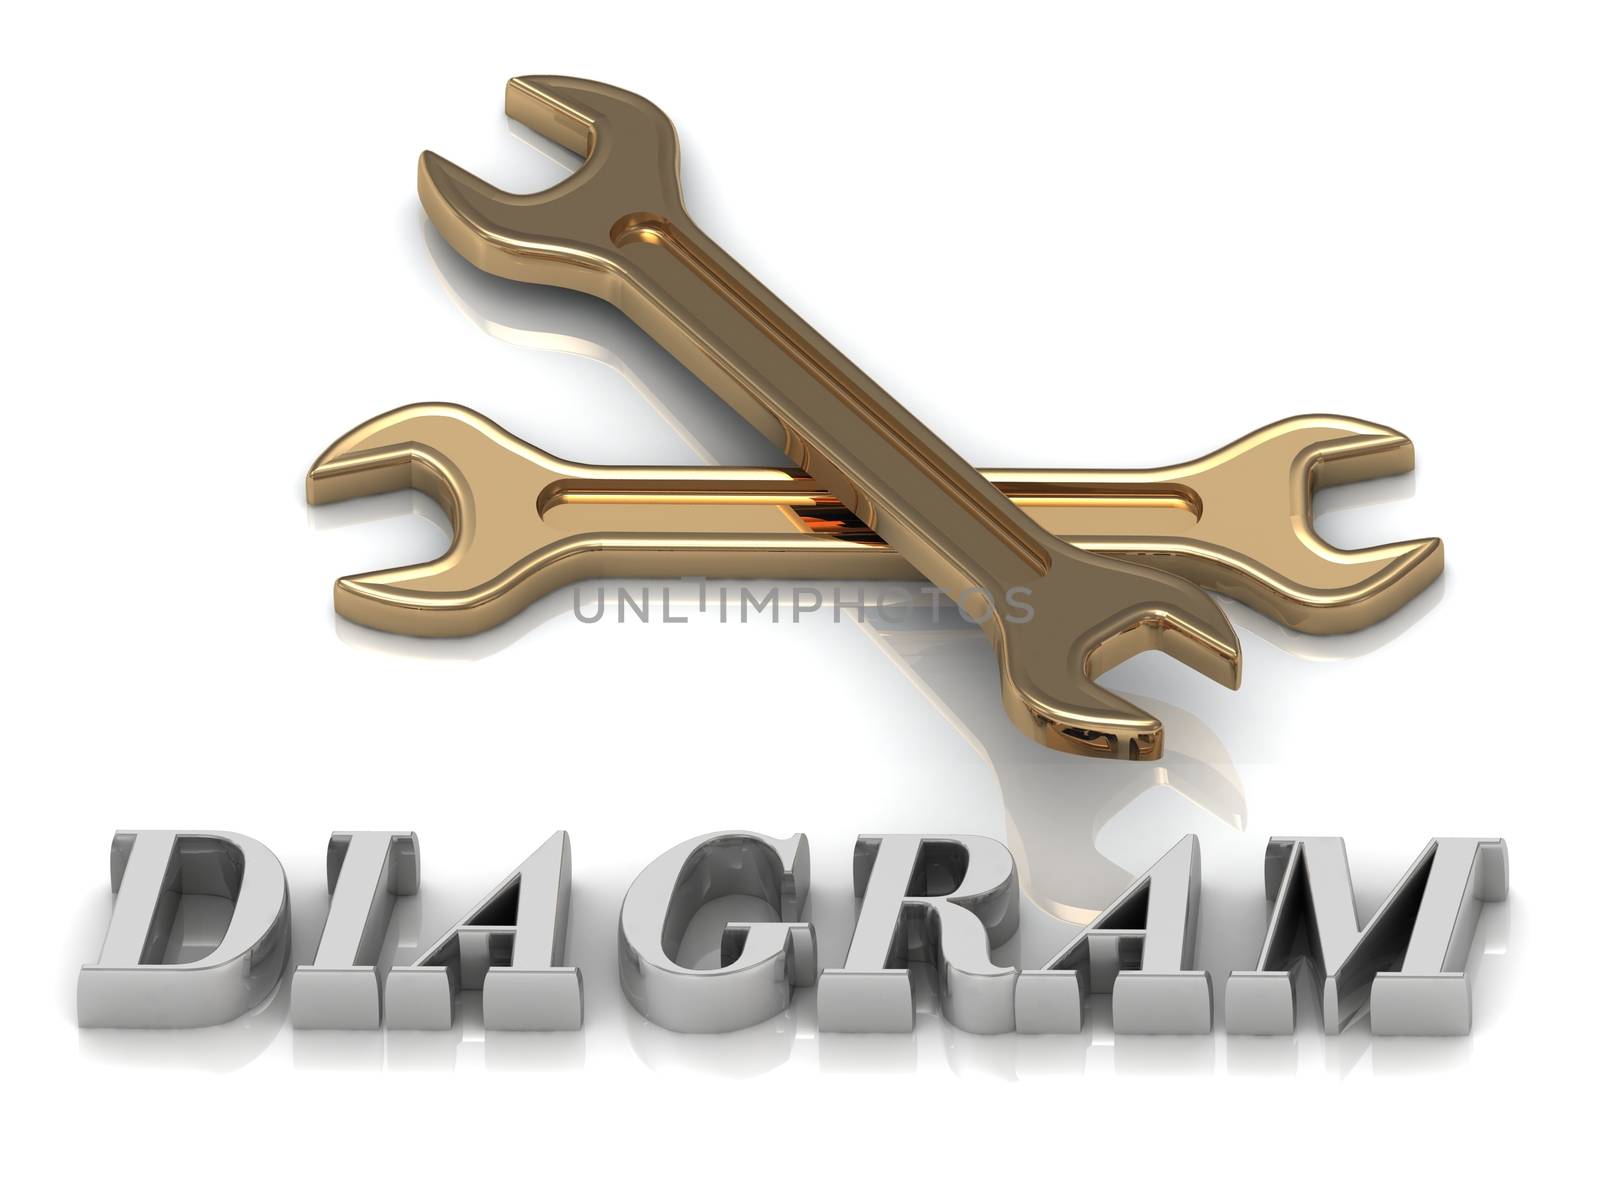 DIAGRAM- inscription of metal letters and 2 keys on white background